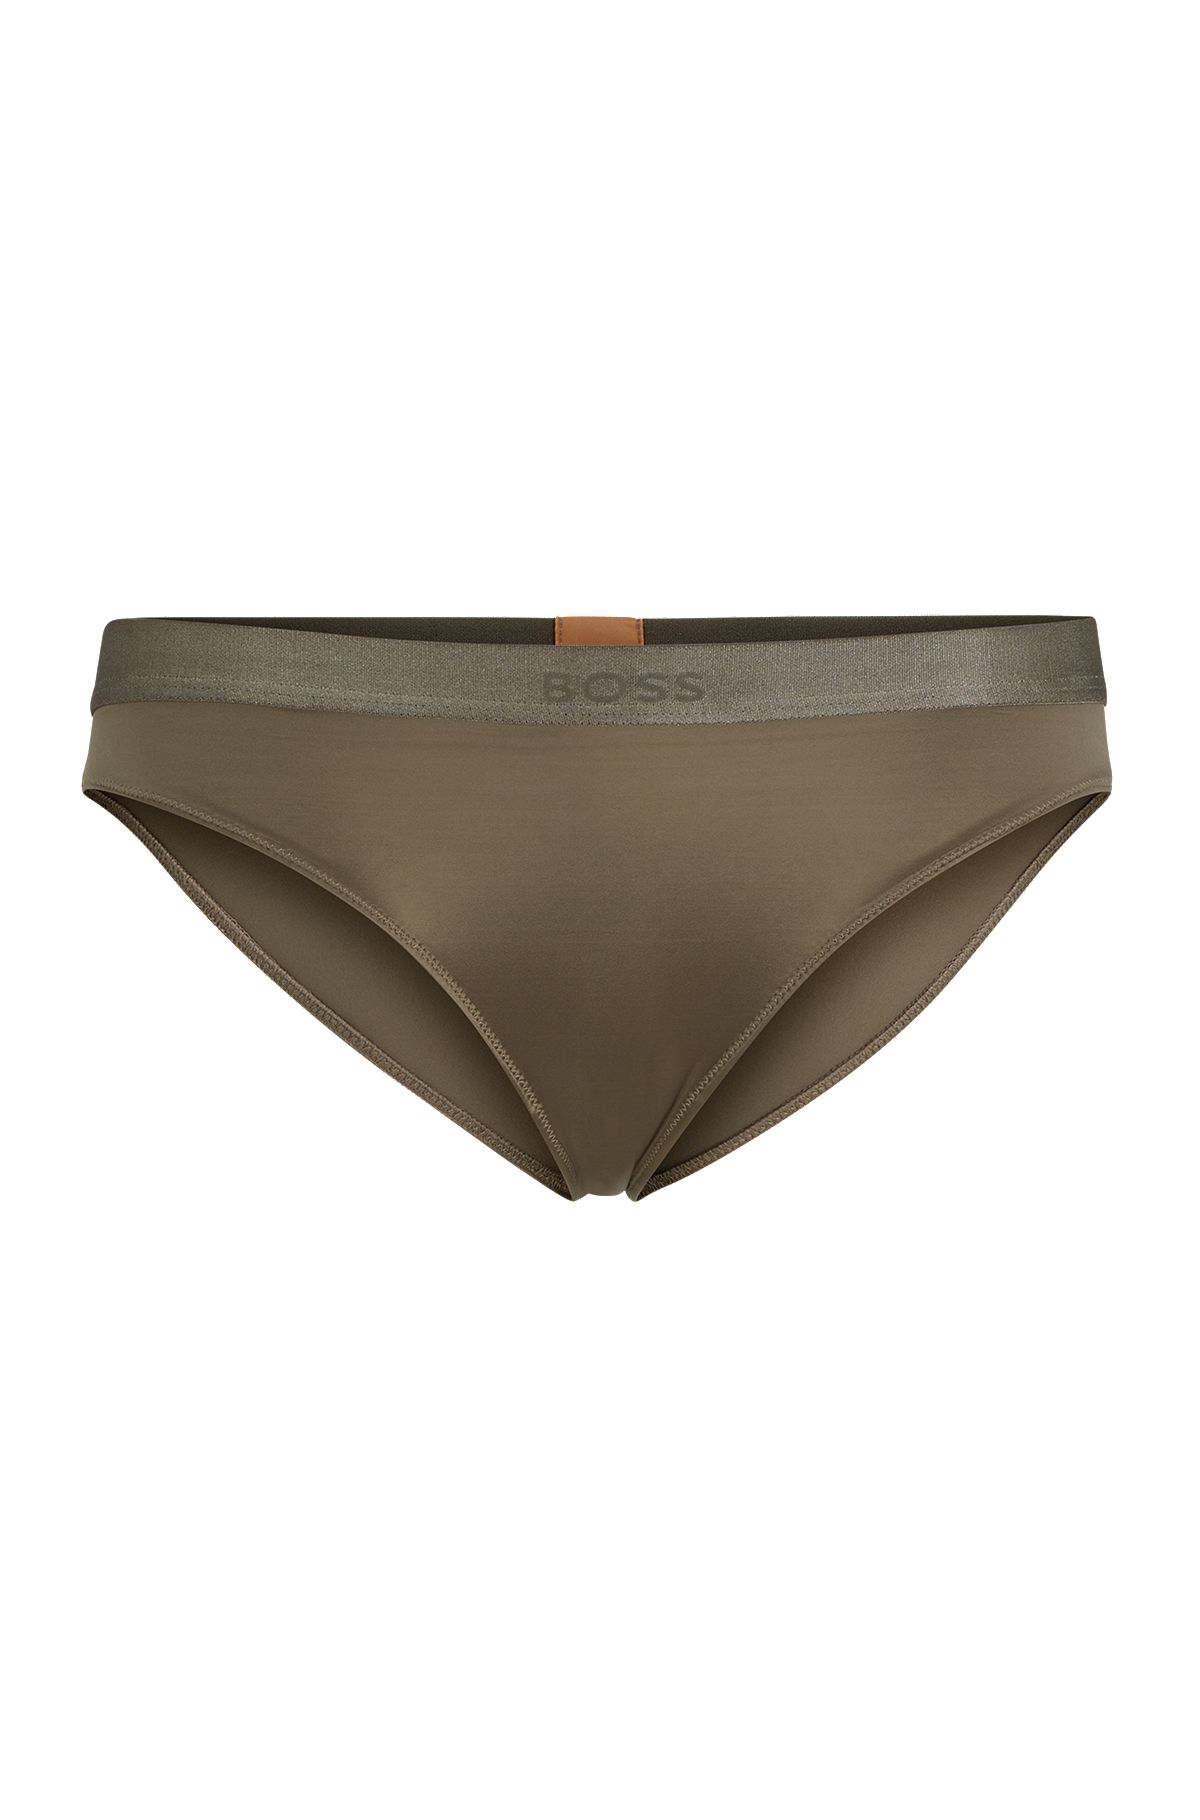 Branded-waistband briefs in microfibre and satin, Dark Brown